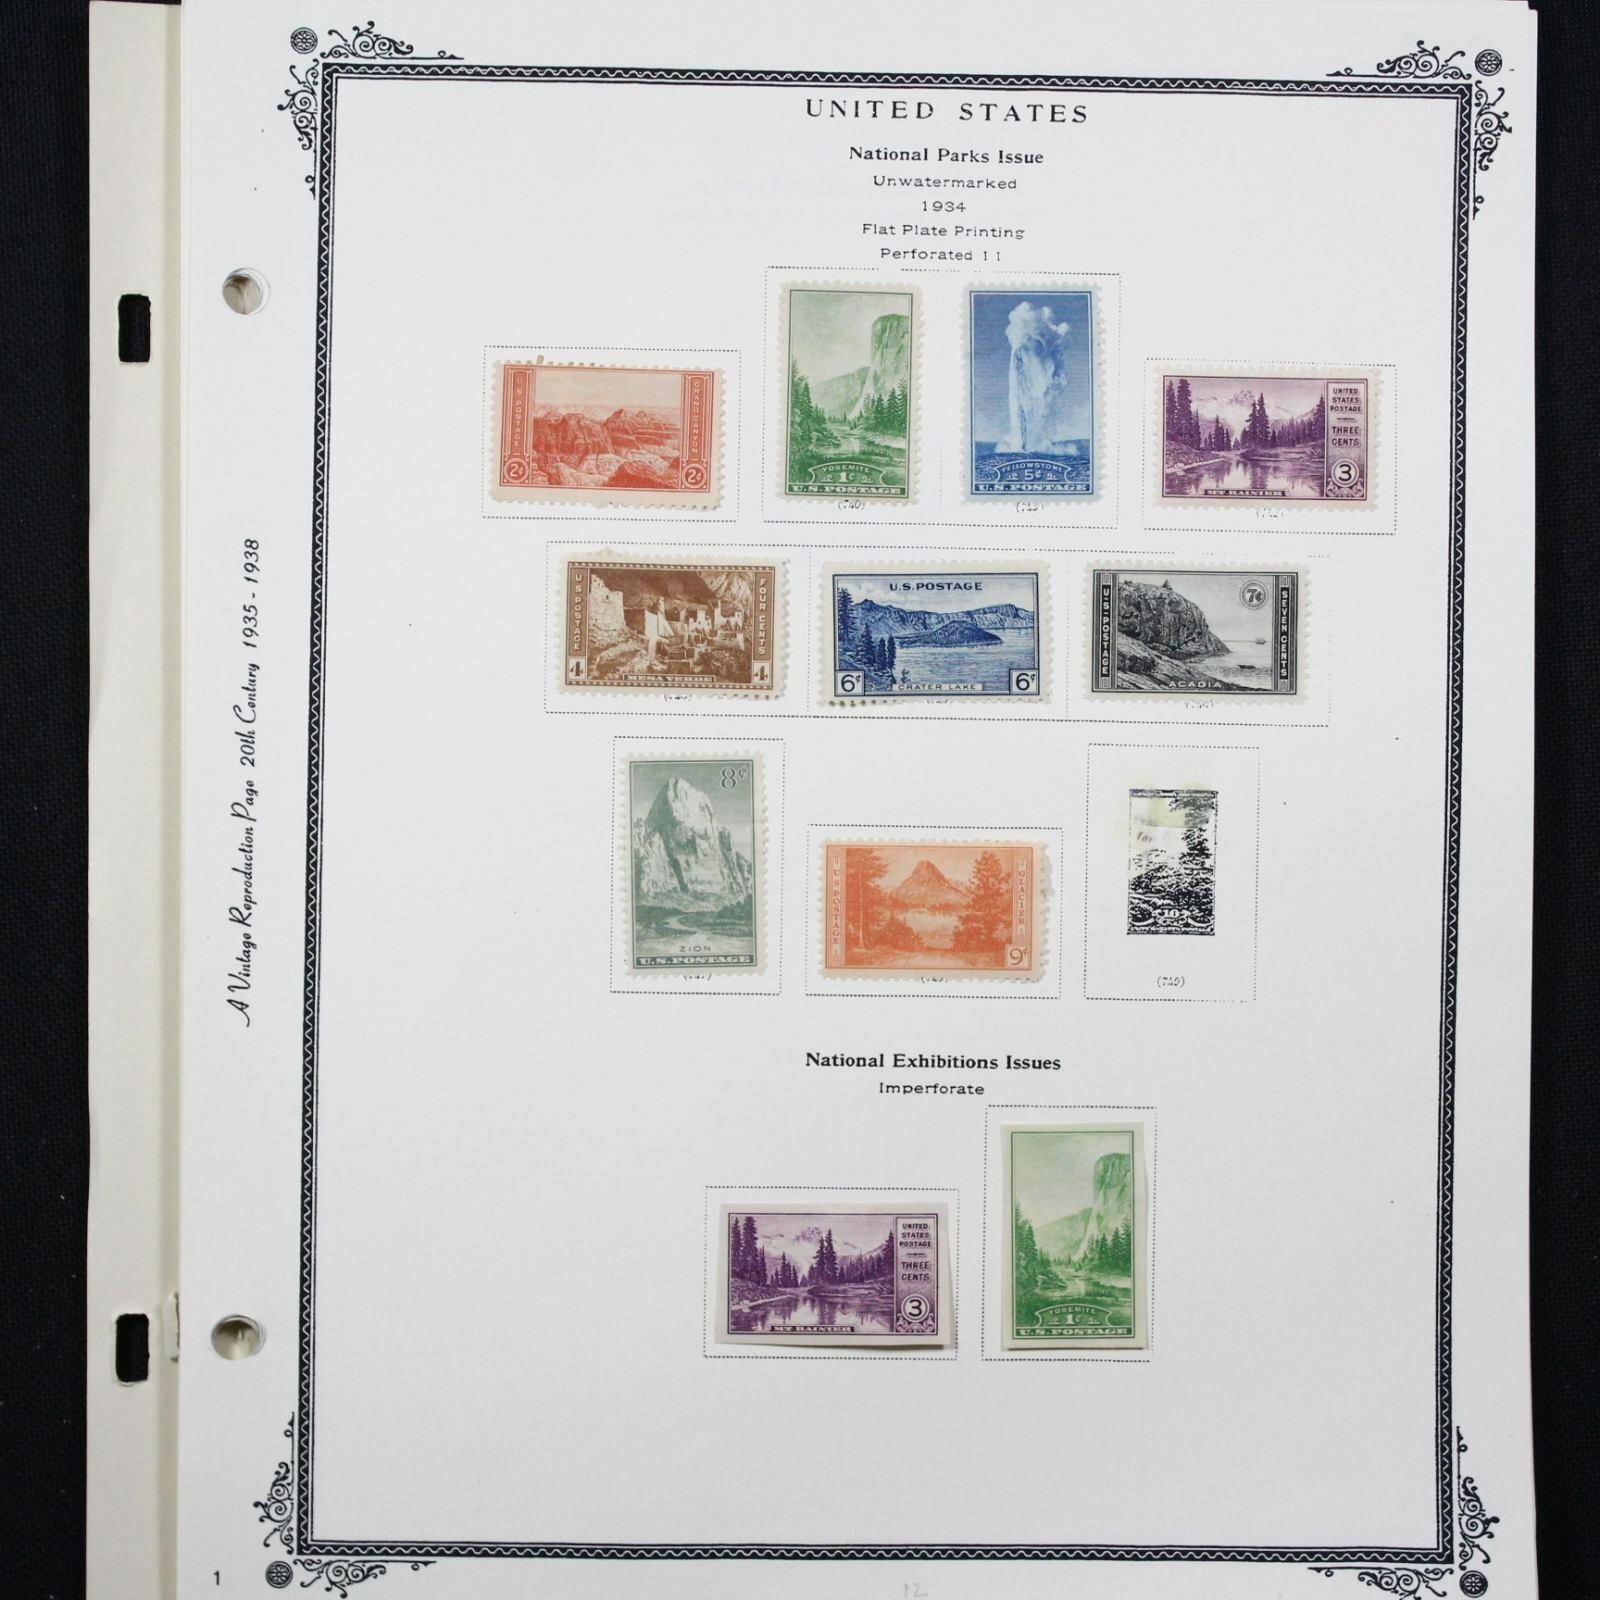 April 18th, 2021 Weekly Stamps & Collectibles Auction